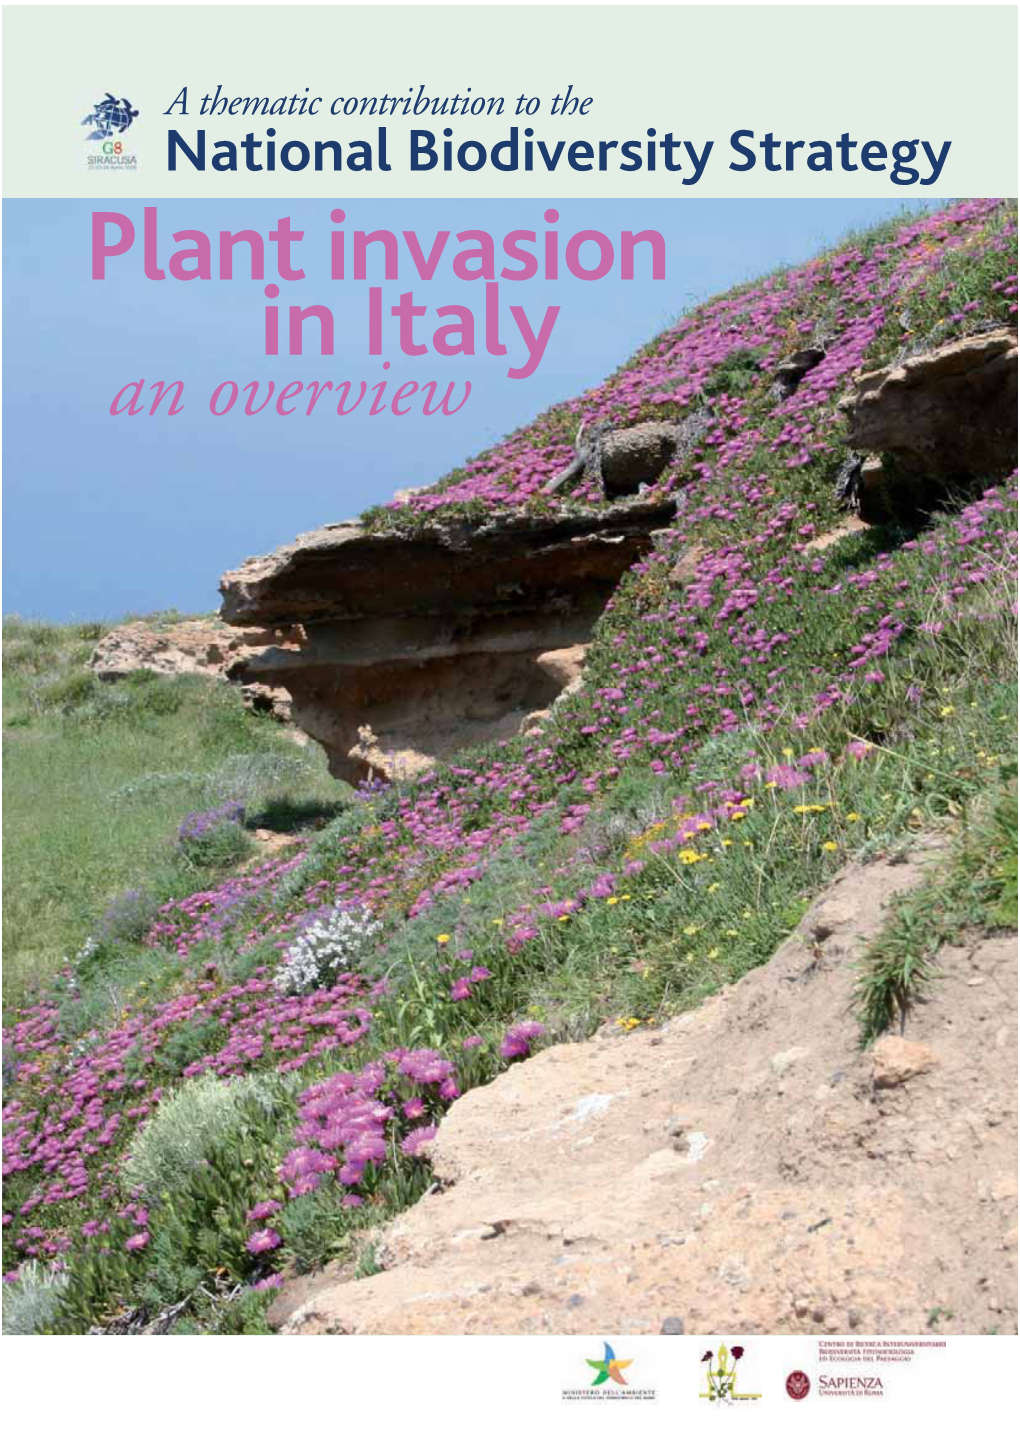 National Biodiversity Strategy Plant Invasion in Italy an Overview a Thematic Contribution to the National Biodiversity Strategy Plant Invasion in Italy an Overview